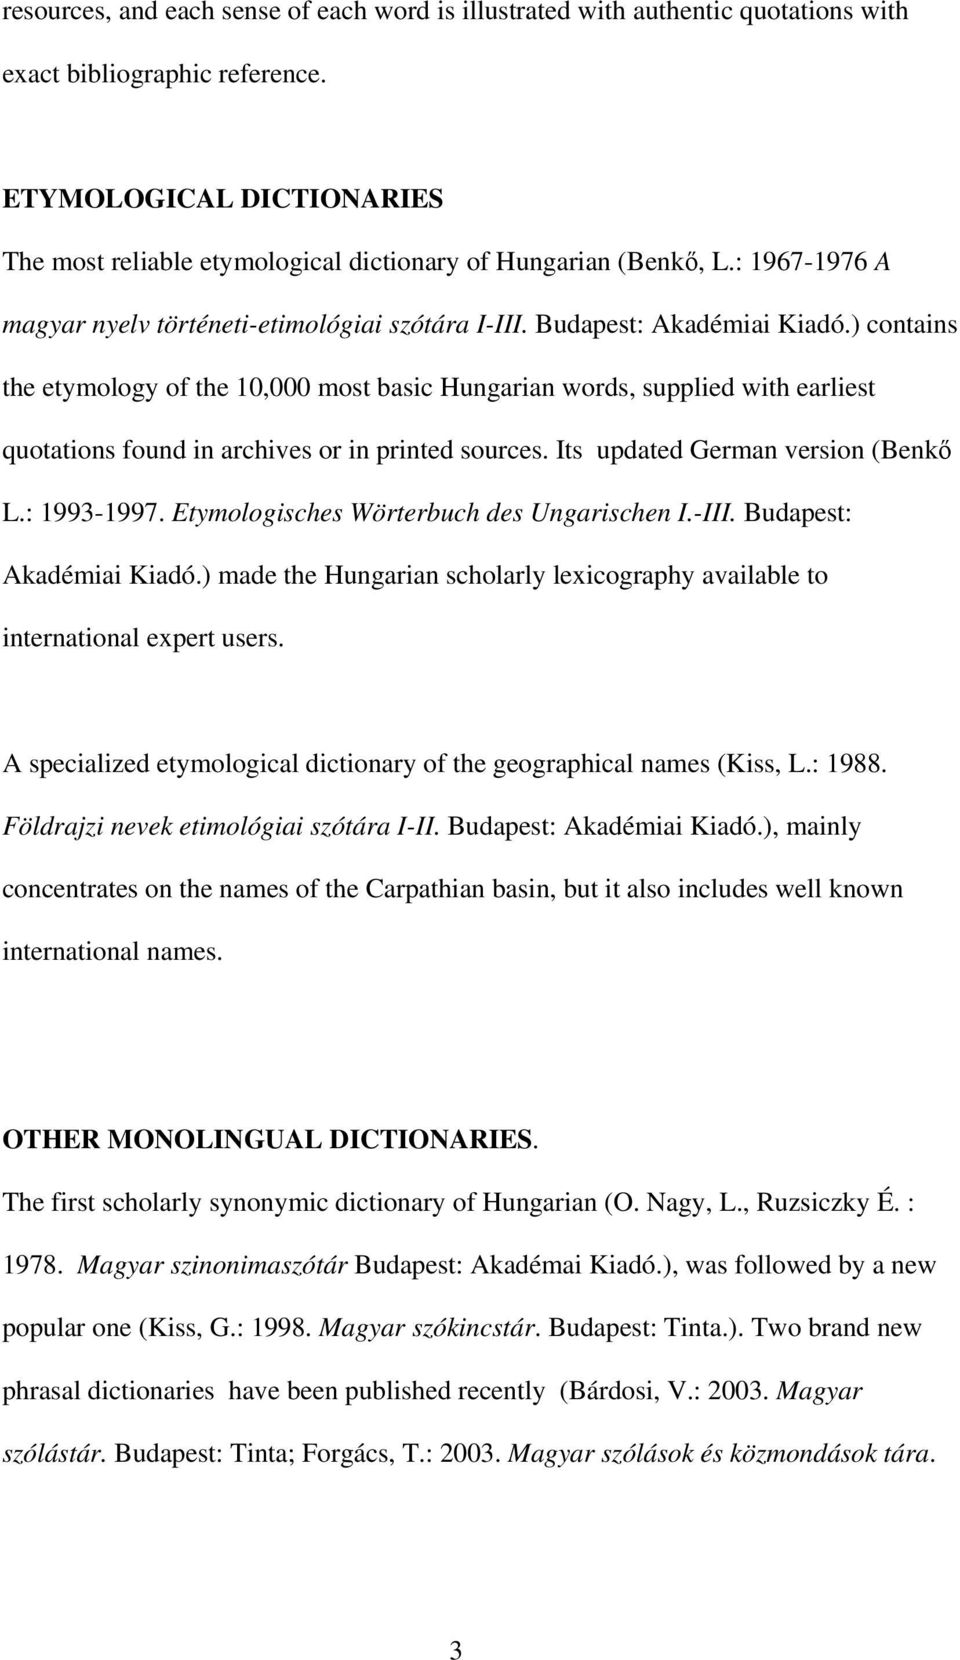 ) contains the etymology of the 10,000 most basic Hungarian words, supplied with earliest quotations found in archives or in printed sources. Its updated German version (Benkő L.: 1993-1997.